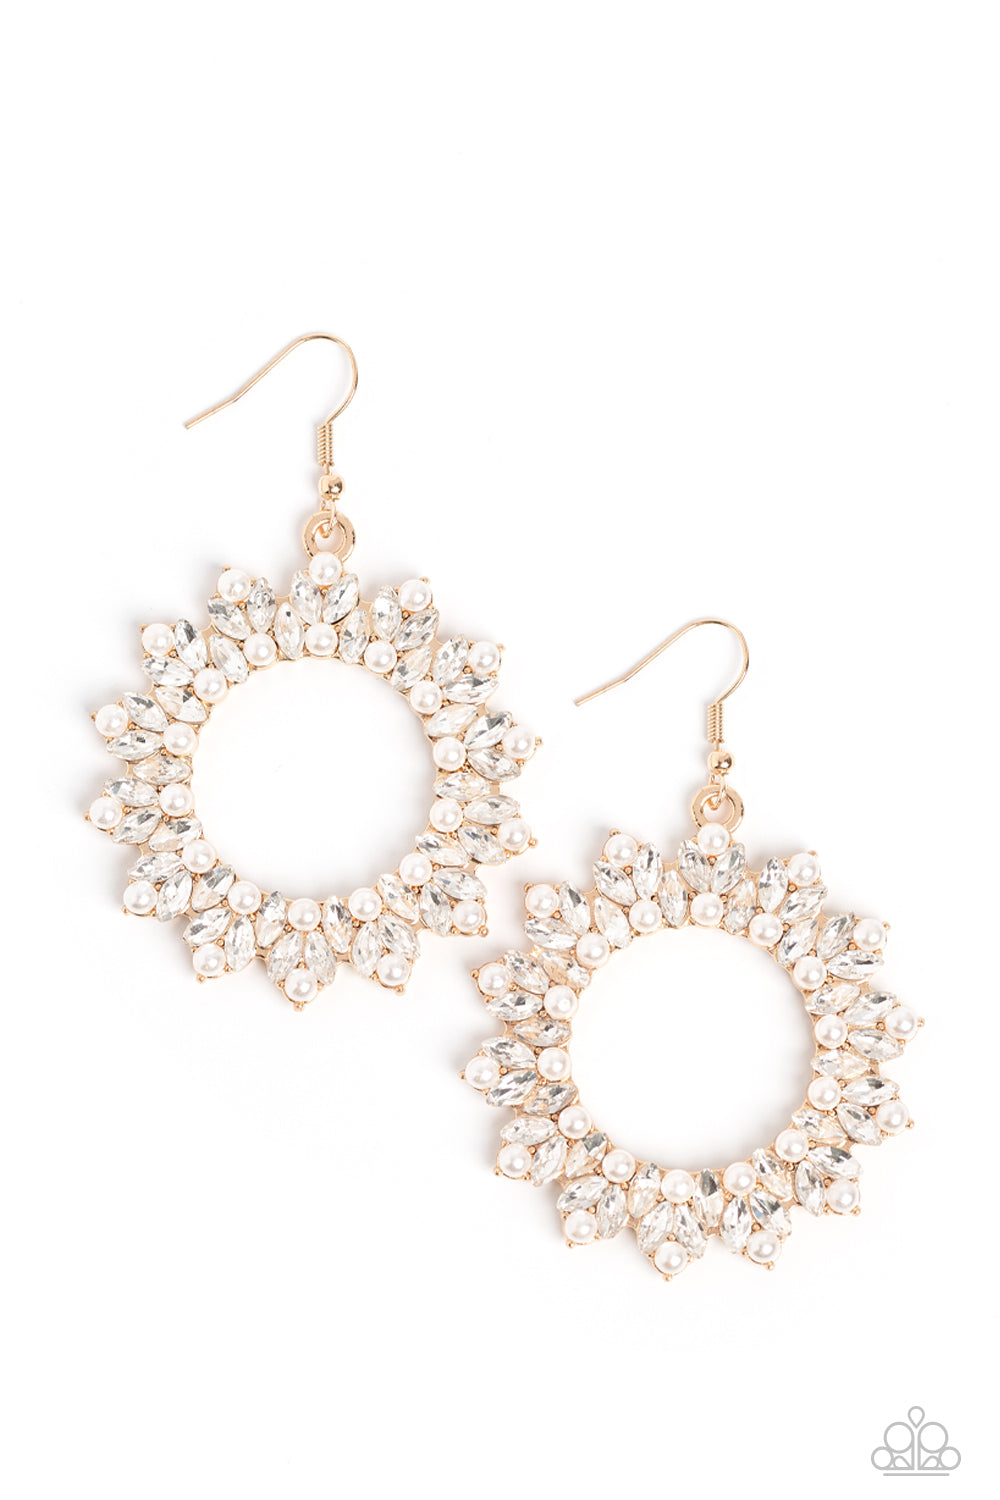 Combustible Couture Gold Earring - Paparazzi Accessories   A bubbly collection of dainty white pearls and marquise-cut rhinestones explodes across the front of a gold wreath, resulting in jaw-dropping dazzle. Earring attaches to a standard fishhook fitting.  Sold as one pair of earrings.